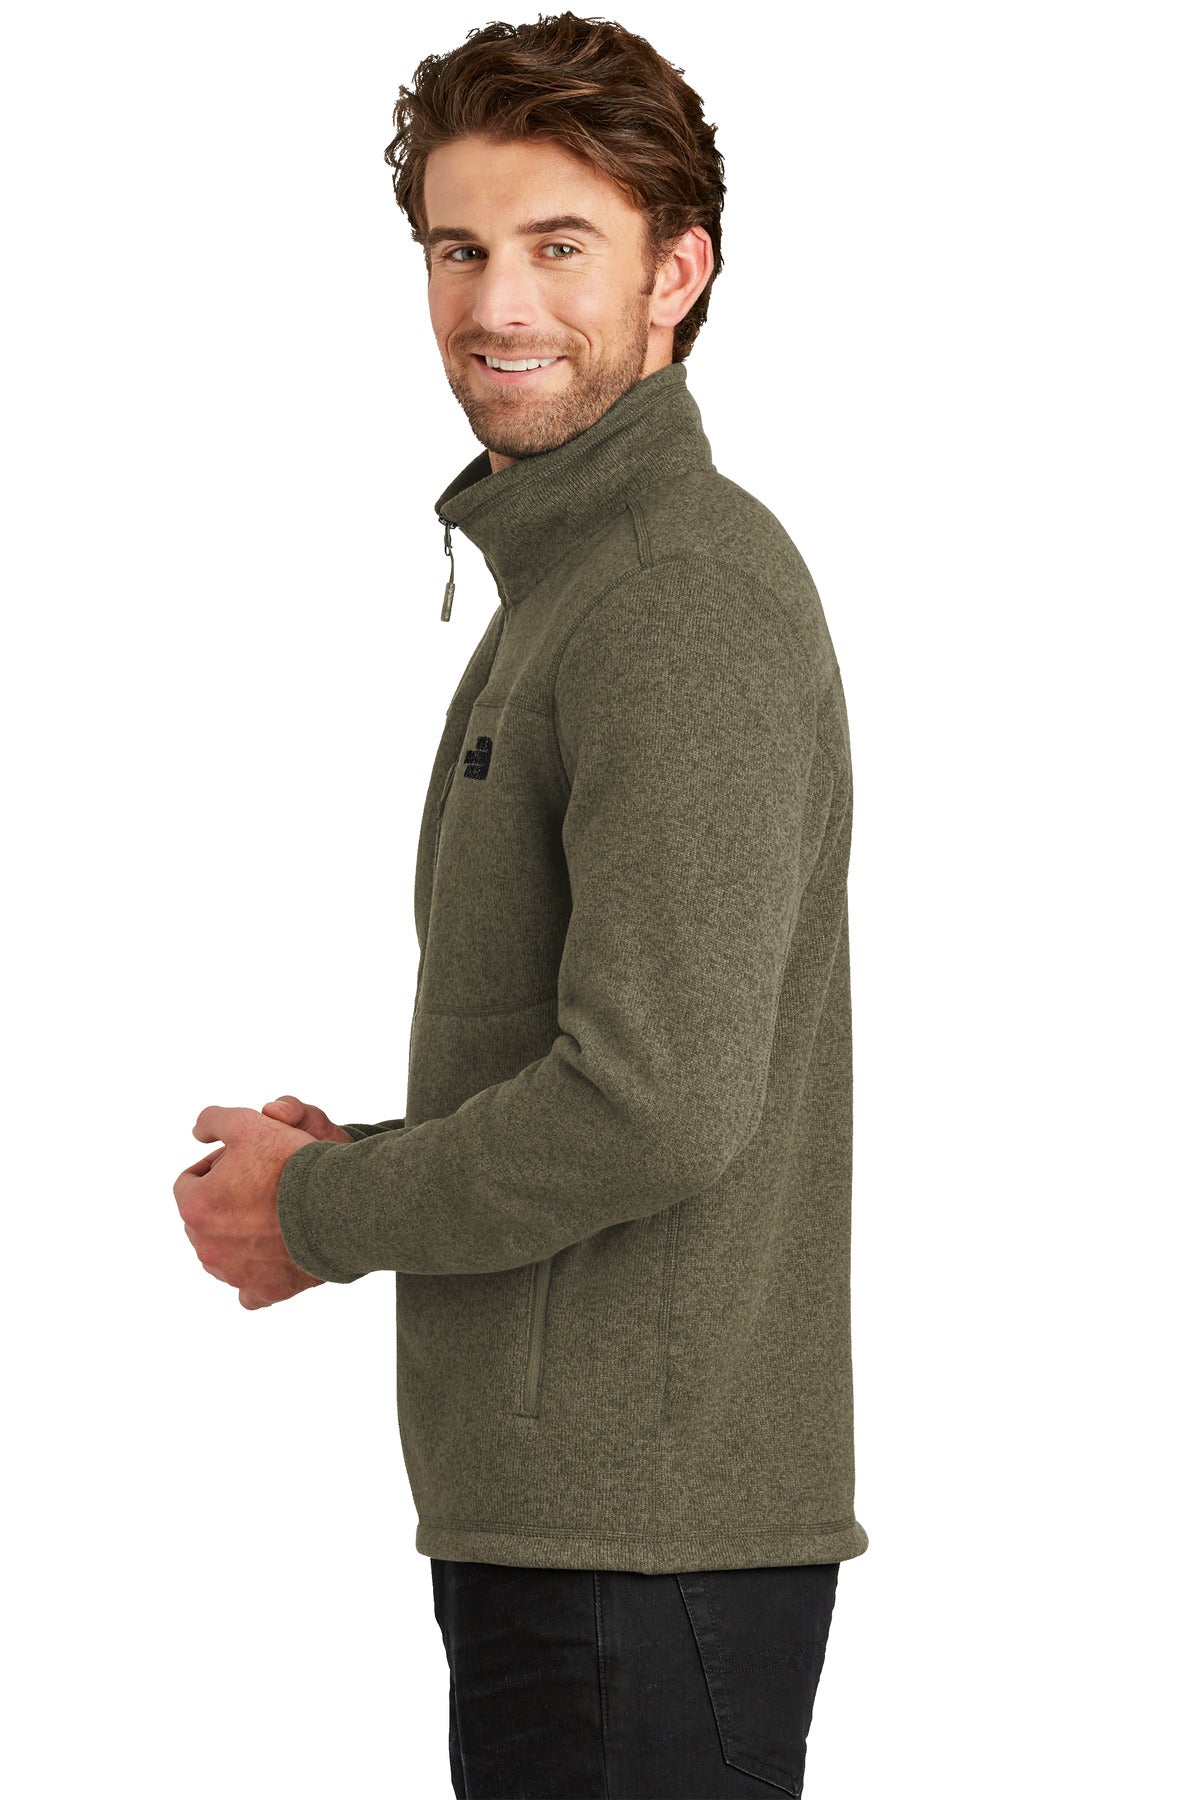 The North Face ® Sweater Fleece Jacket. NF0A3LH7 - DFW Impression